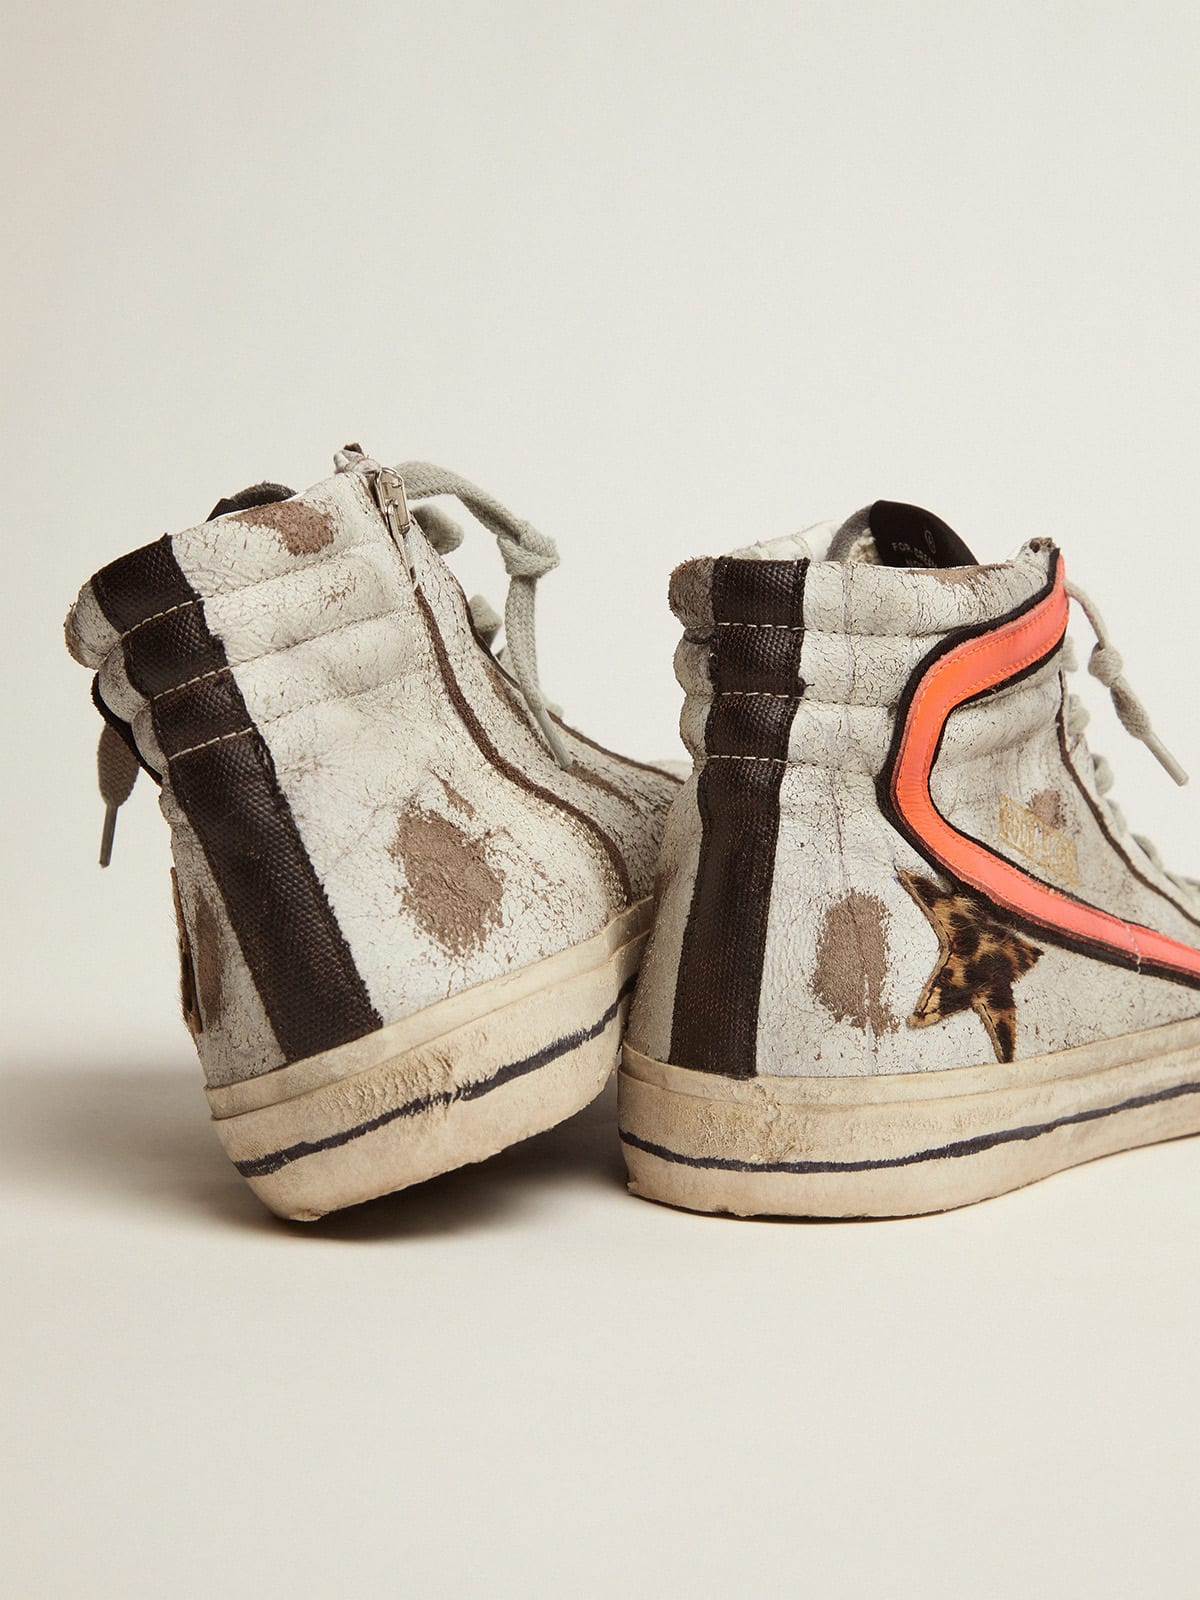 Golden Goose - Slide sneakers in crackled suede with leopard-print pony skin star in 